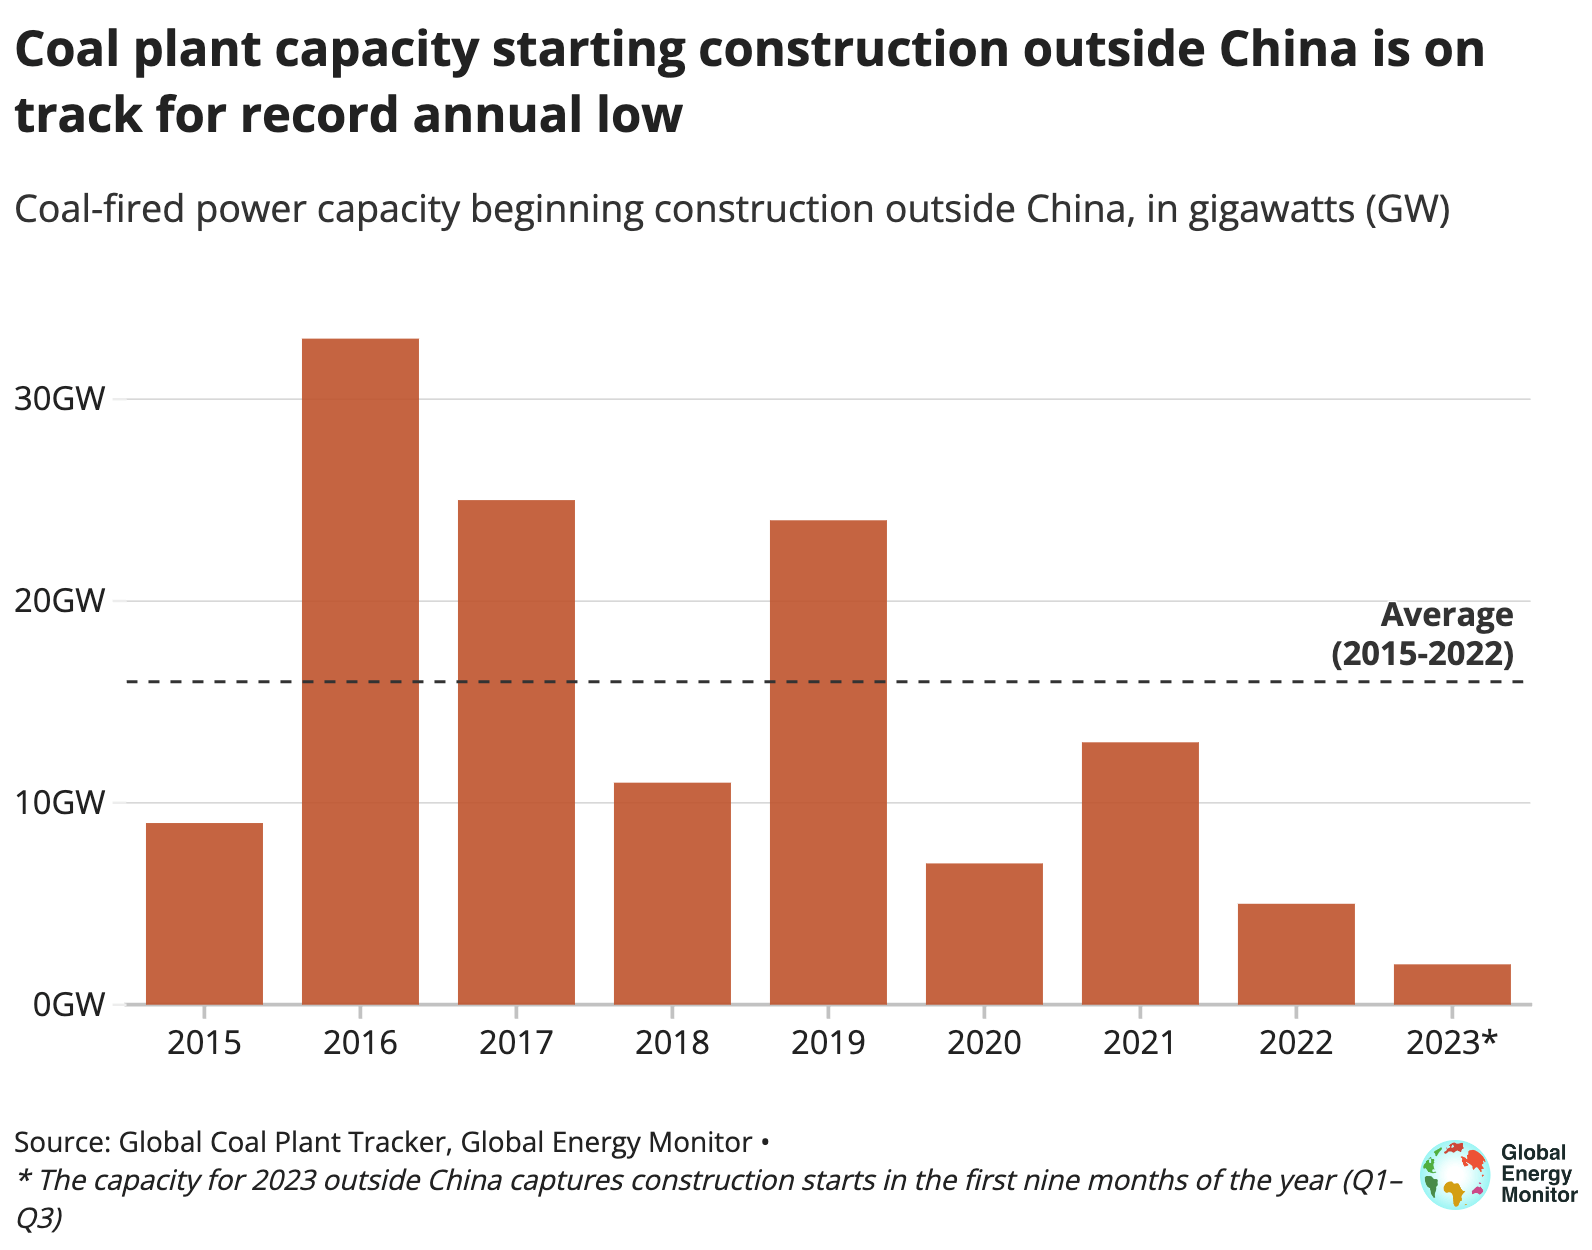 Bar chart showing coal plant capacity starting construction outside China from 2015 to 2023, with the 2023 value so far on track for a record low around 2GW. The highest value was in 2016 when it was above 30GW